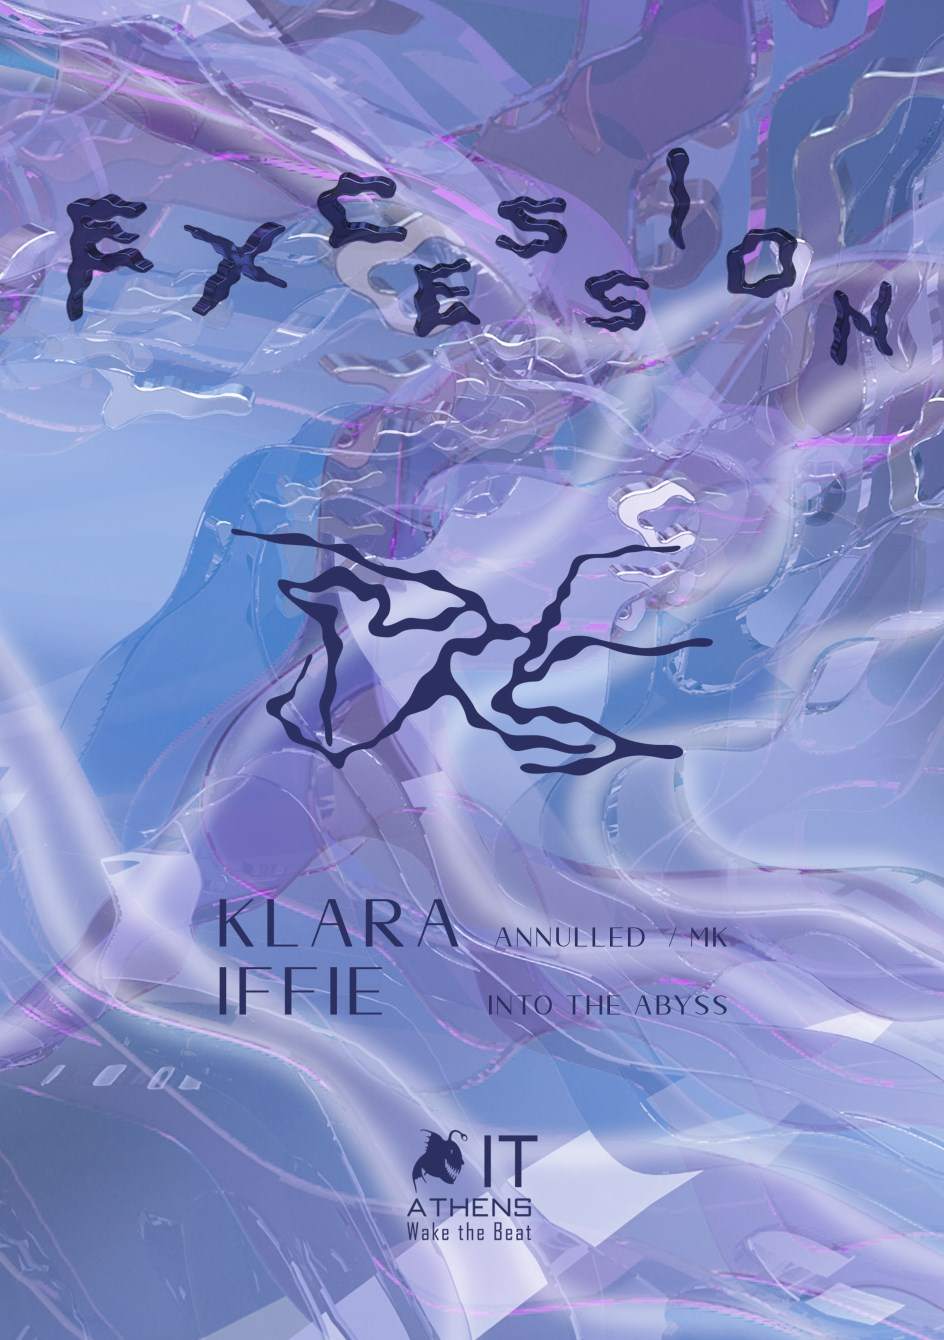 Excession #01 with Klara [MK - Annulled] & Iffie [Into The Abyss] - フライヤー表